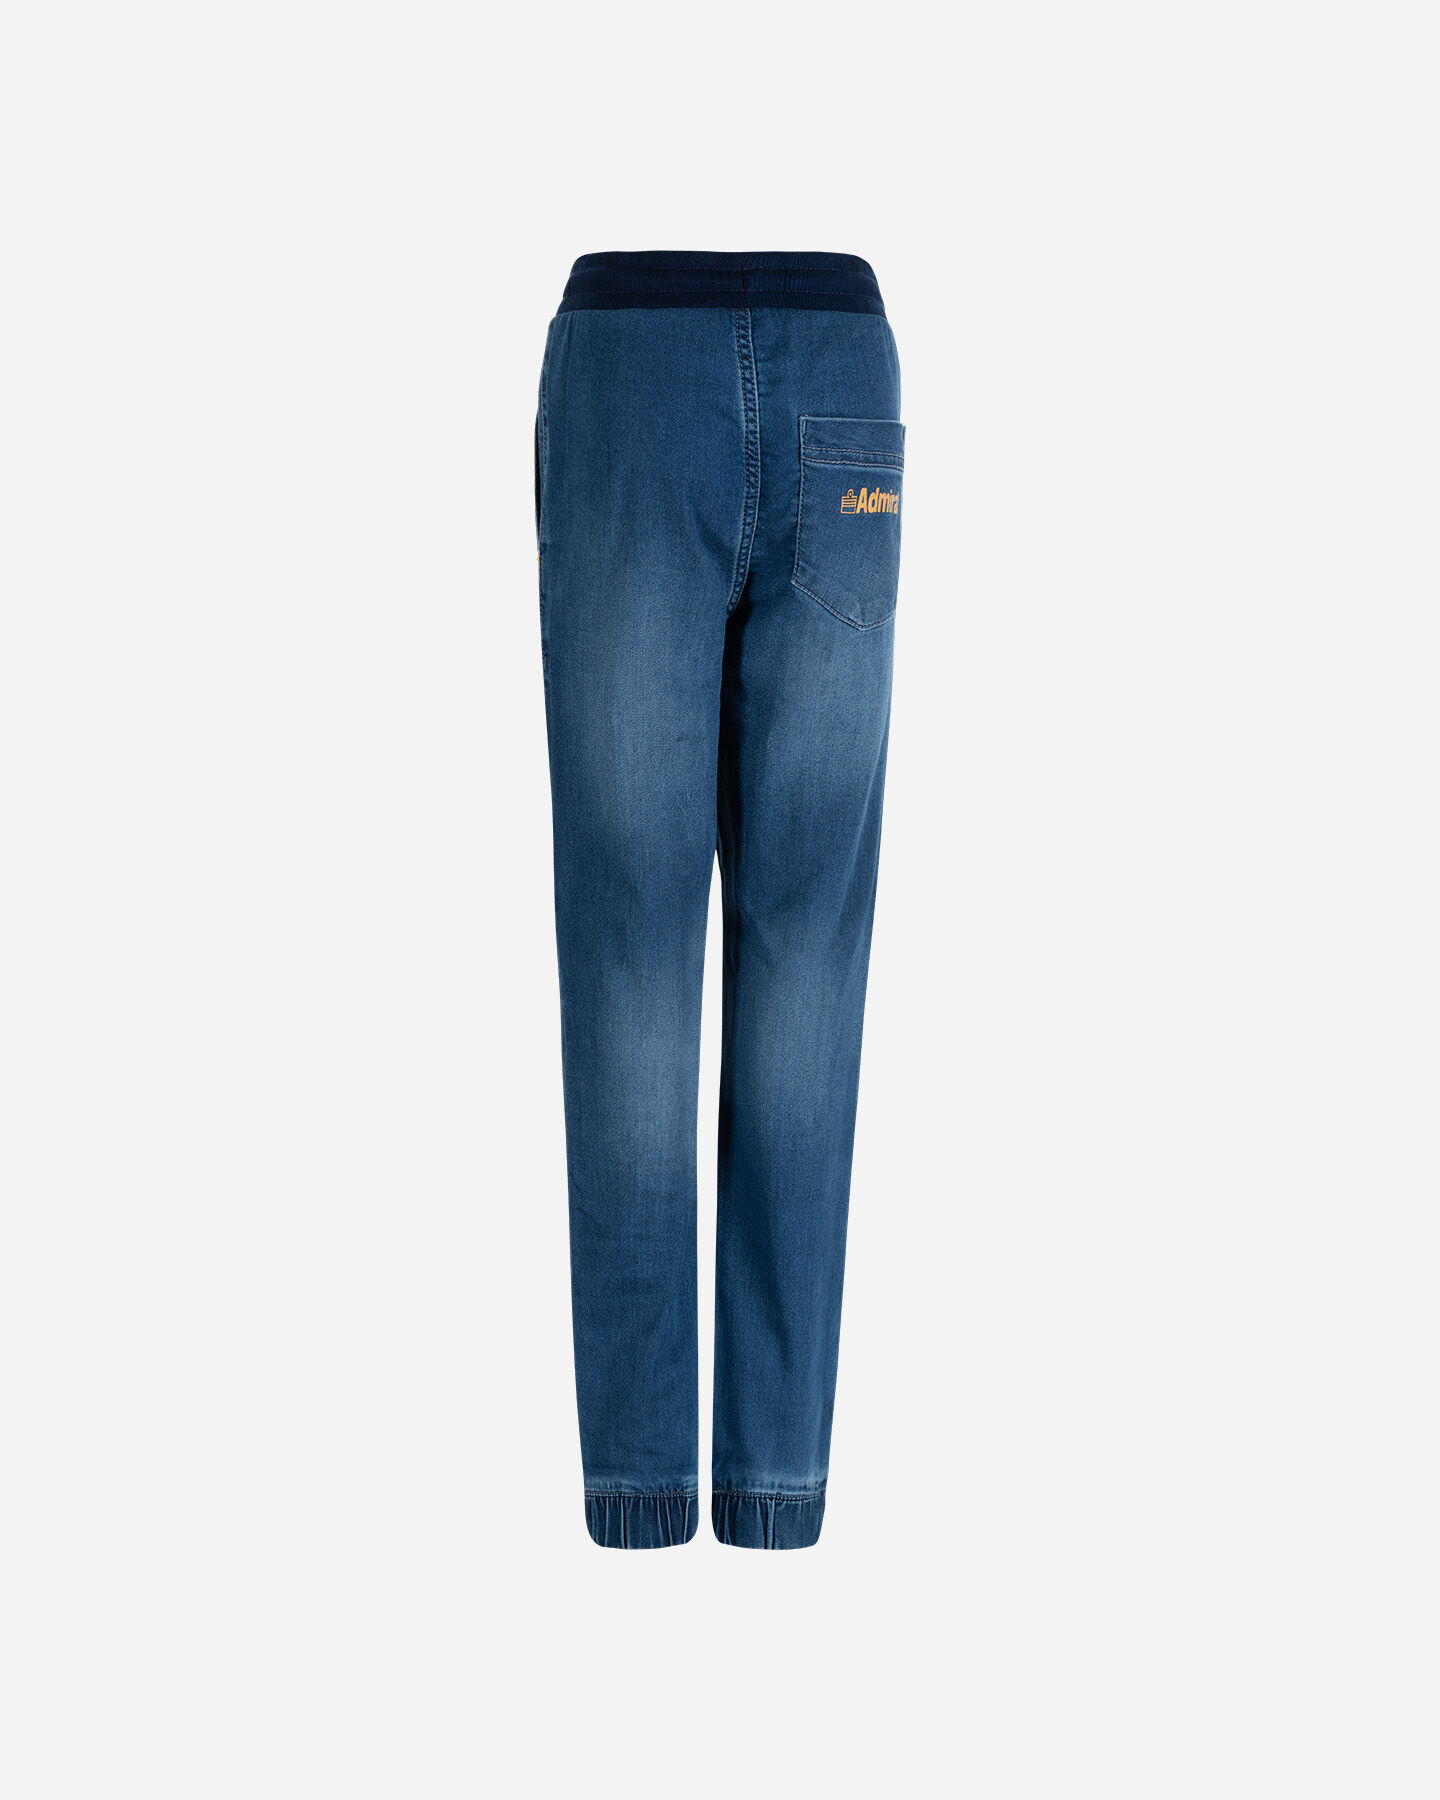  Jeans ADMIRAL LIFESTYLE JR S4106381|MDBLUE|10A scatto 1